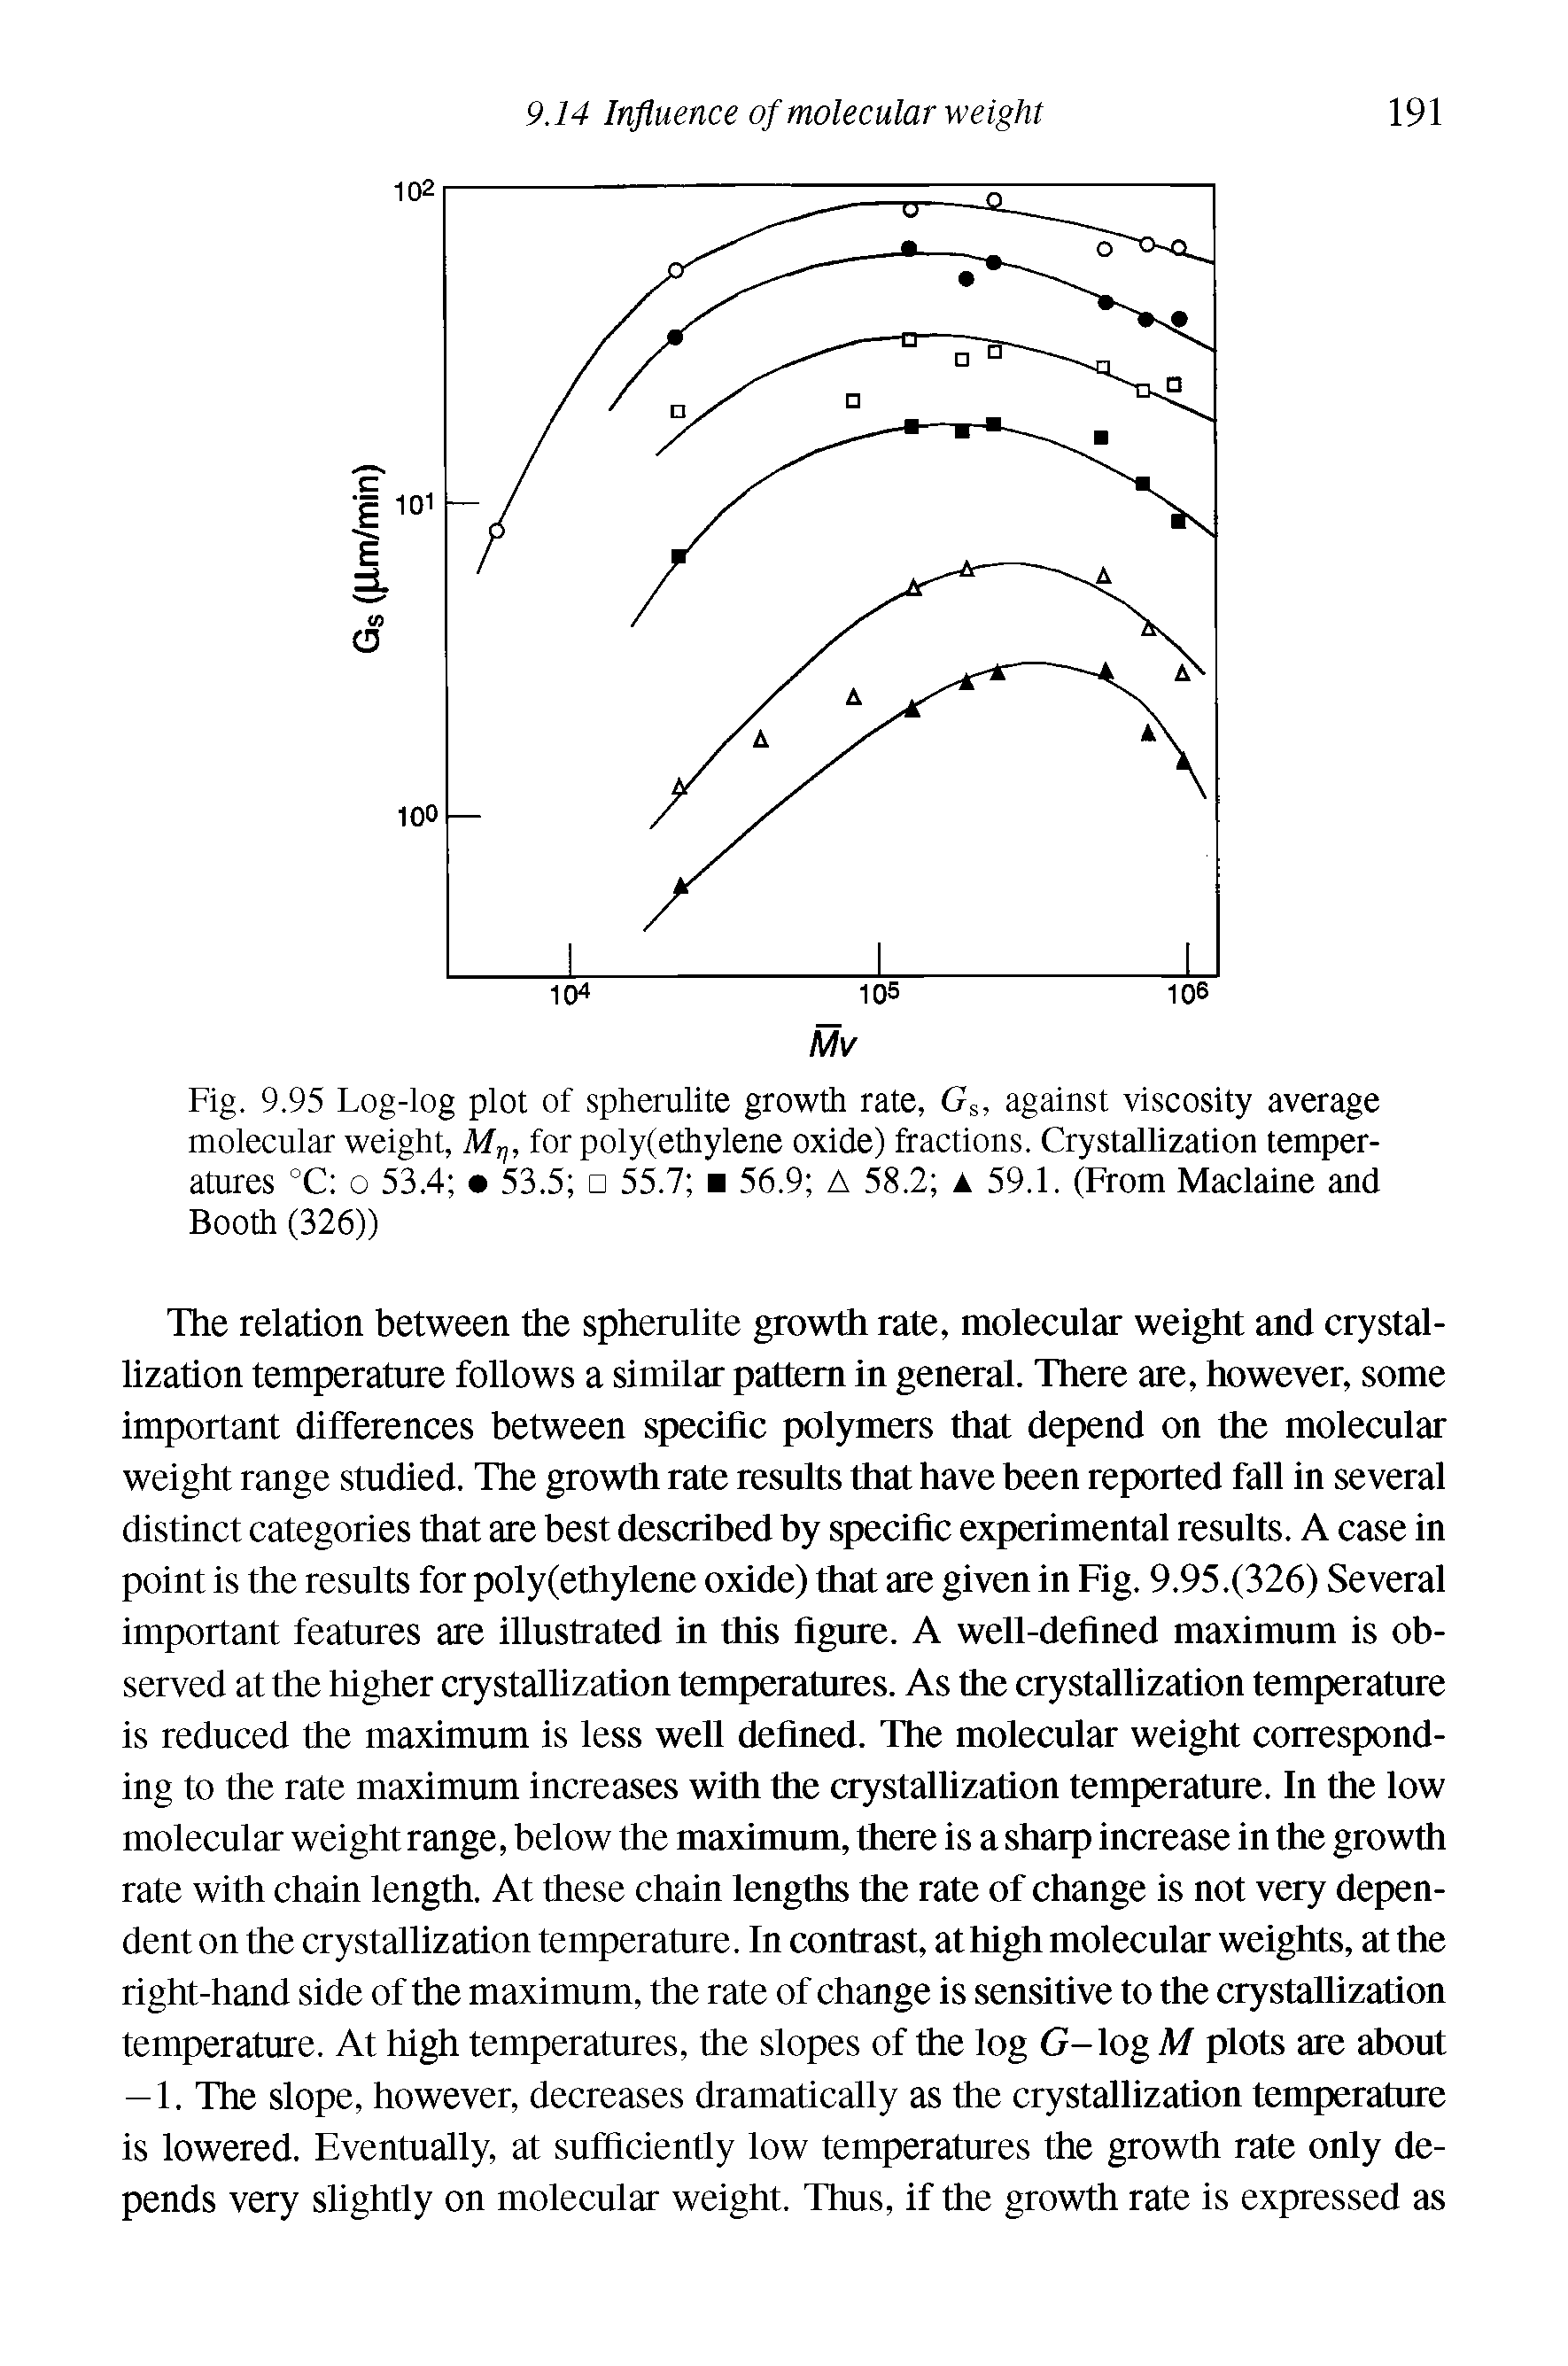 Fig. 9.95 Log-log plot of spherulite growth rate, Gs, against viscosity average molecular weight, My, for poly(ethylene oxide) fractions. Crystallization temperatures °C 0 53.4 53.5 55.7 56.9 A 58.2 59.1. (From Maclaine and Booth (326))...